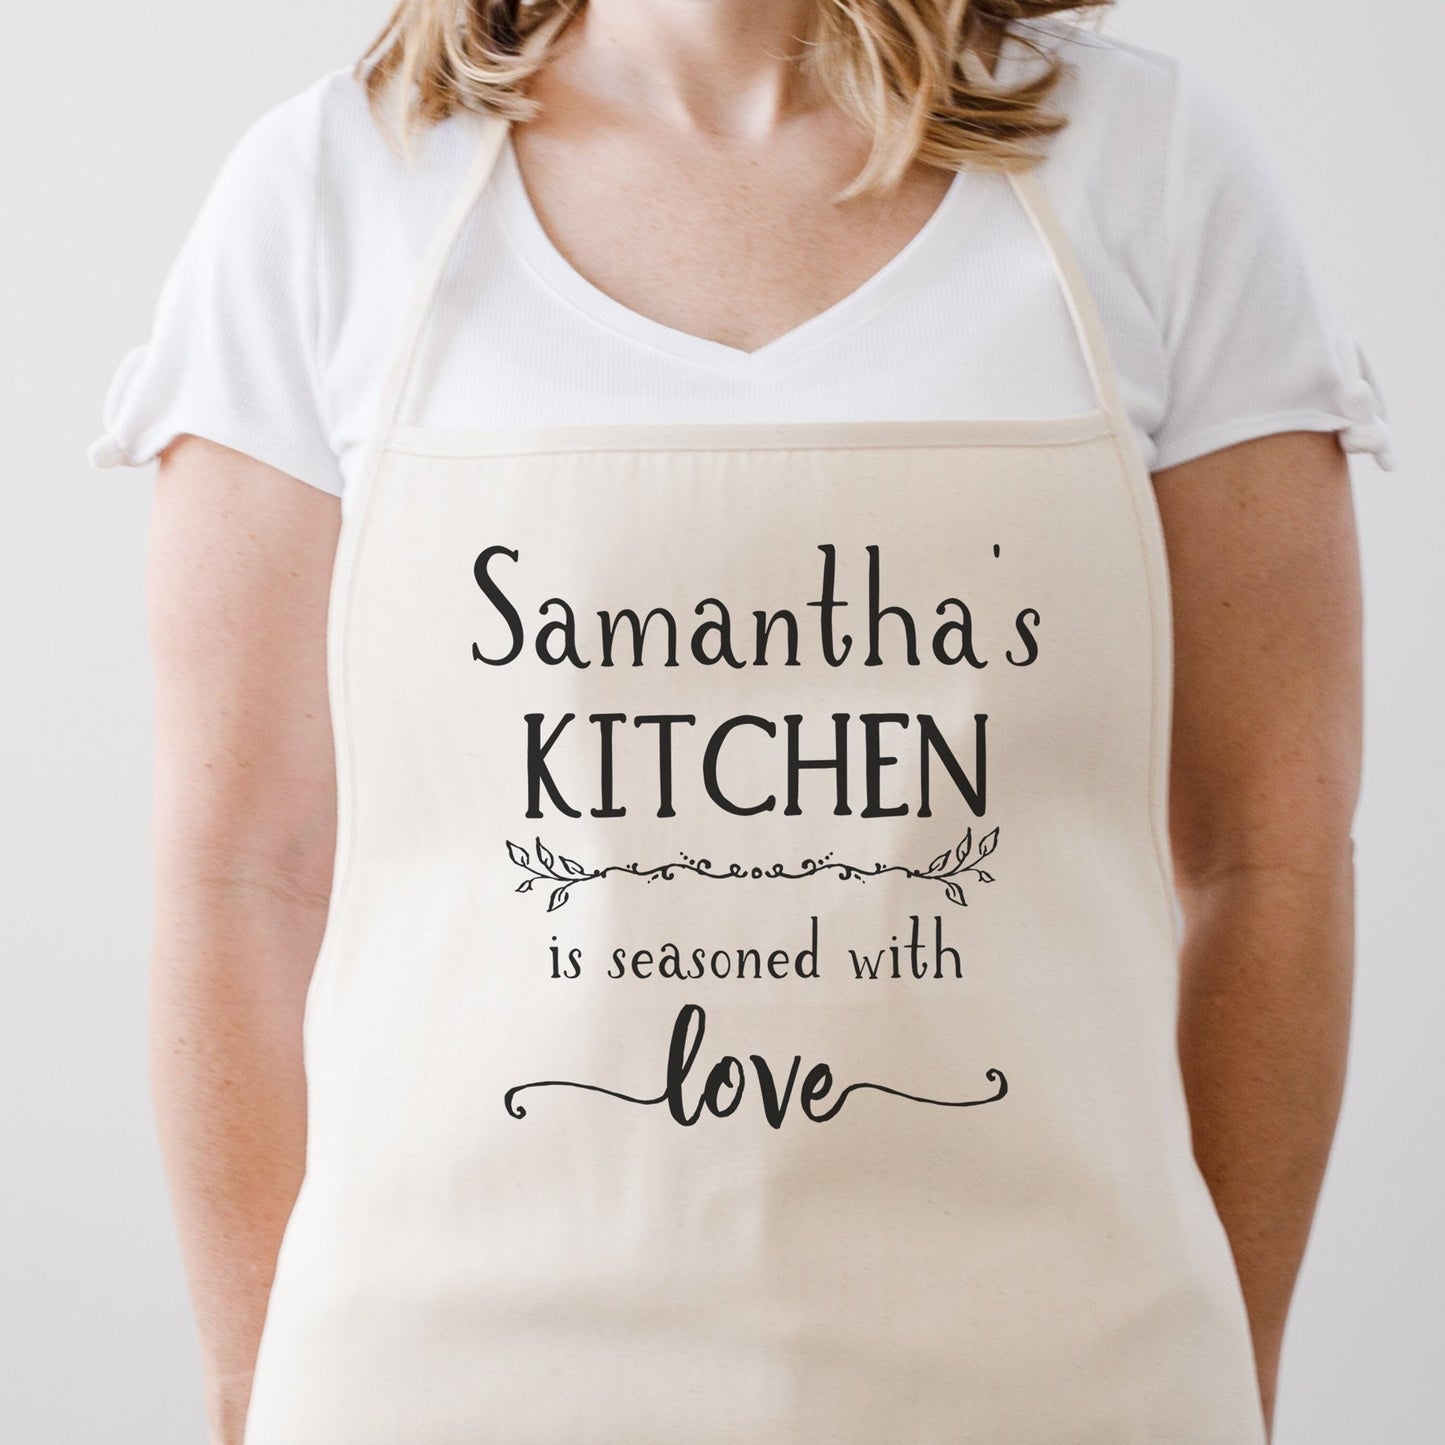 This Kitchen is Seasoned With Love, Personalized Oven Mitt